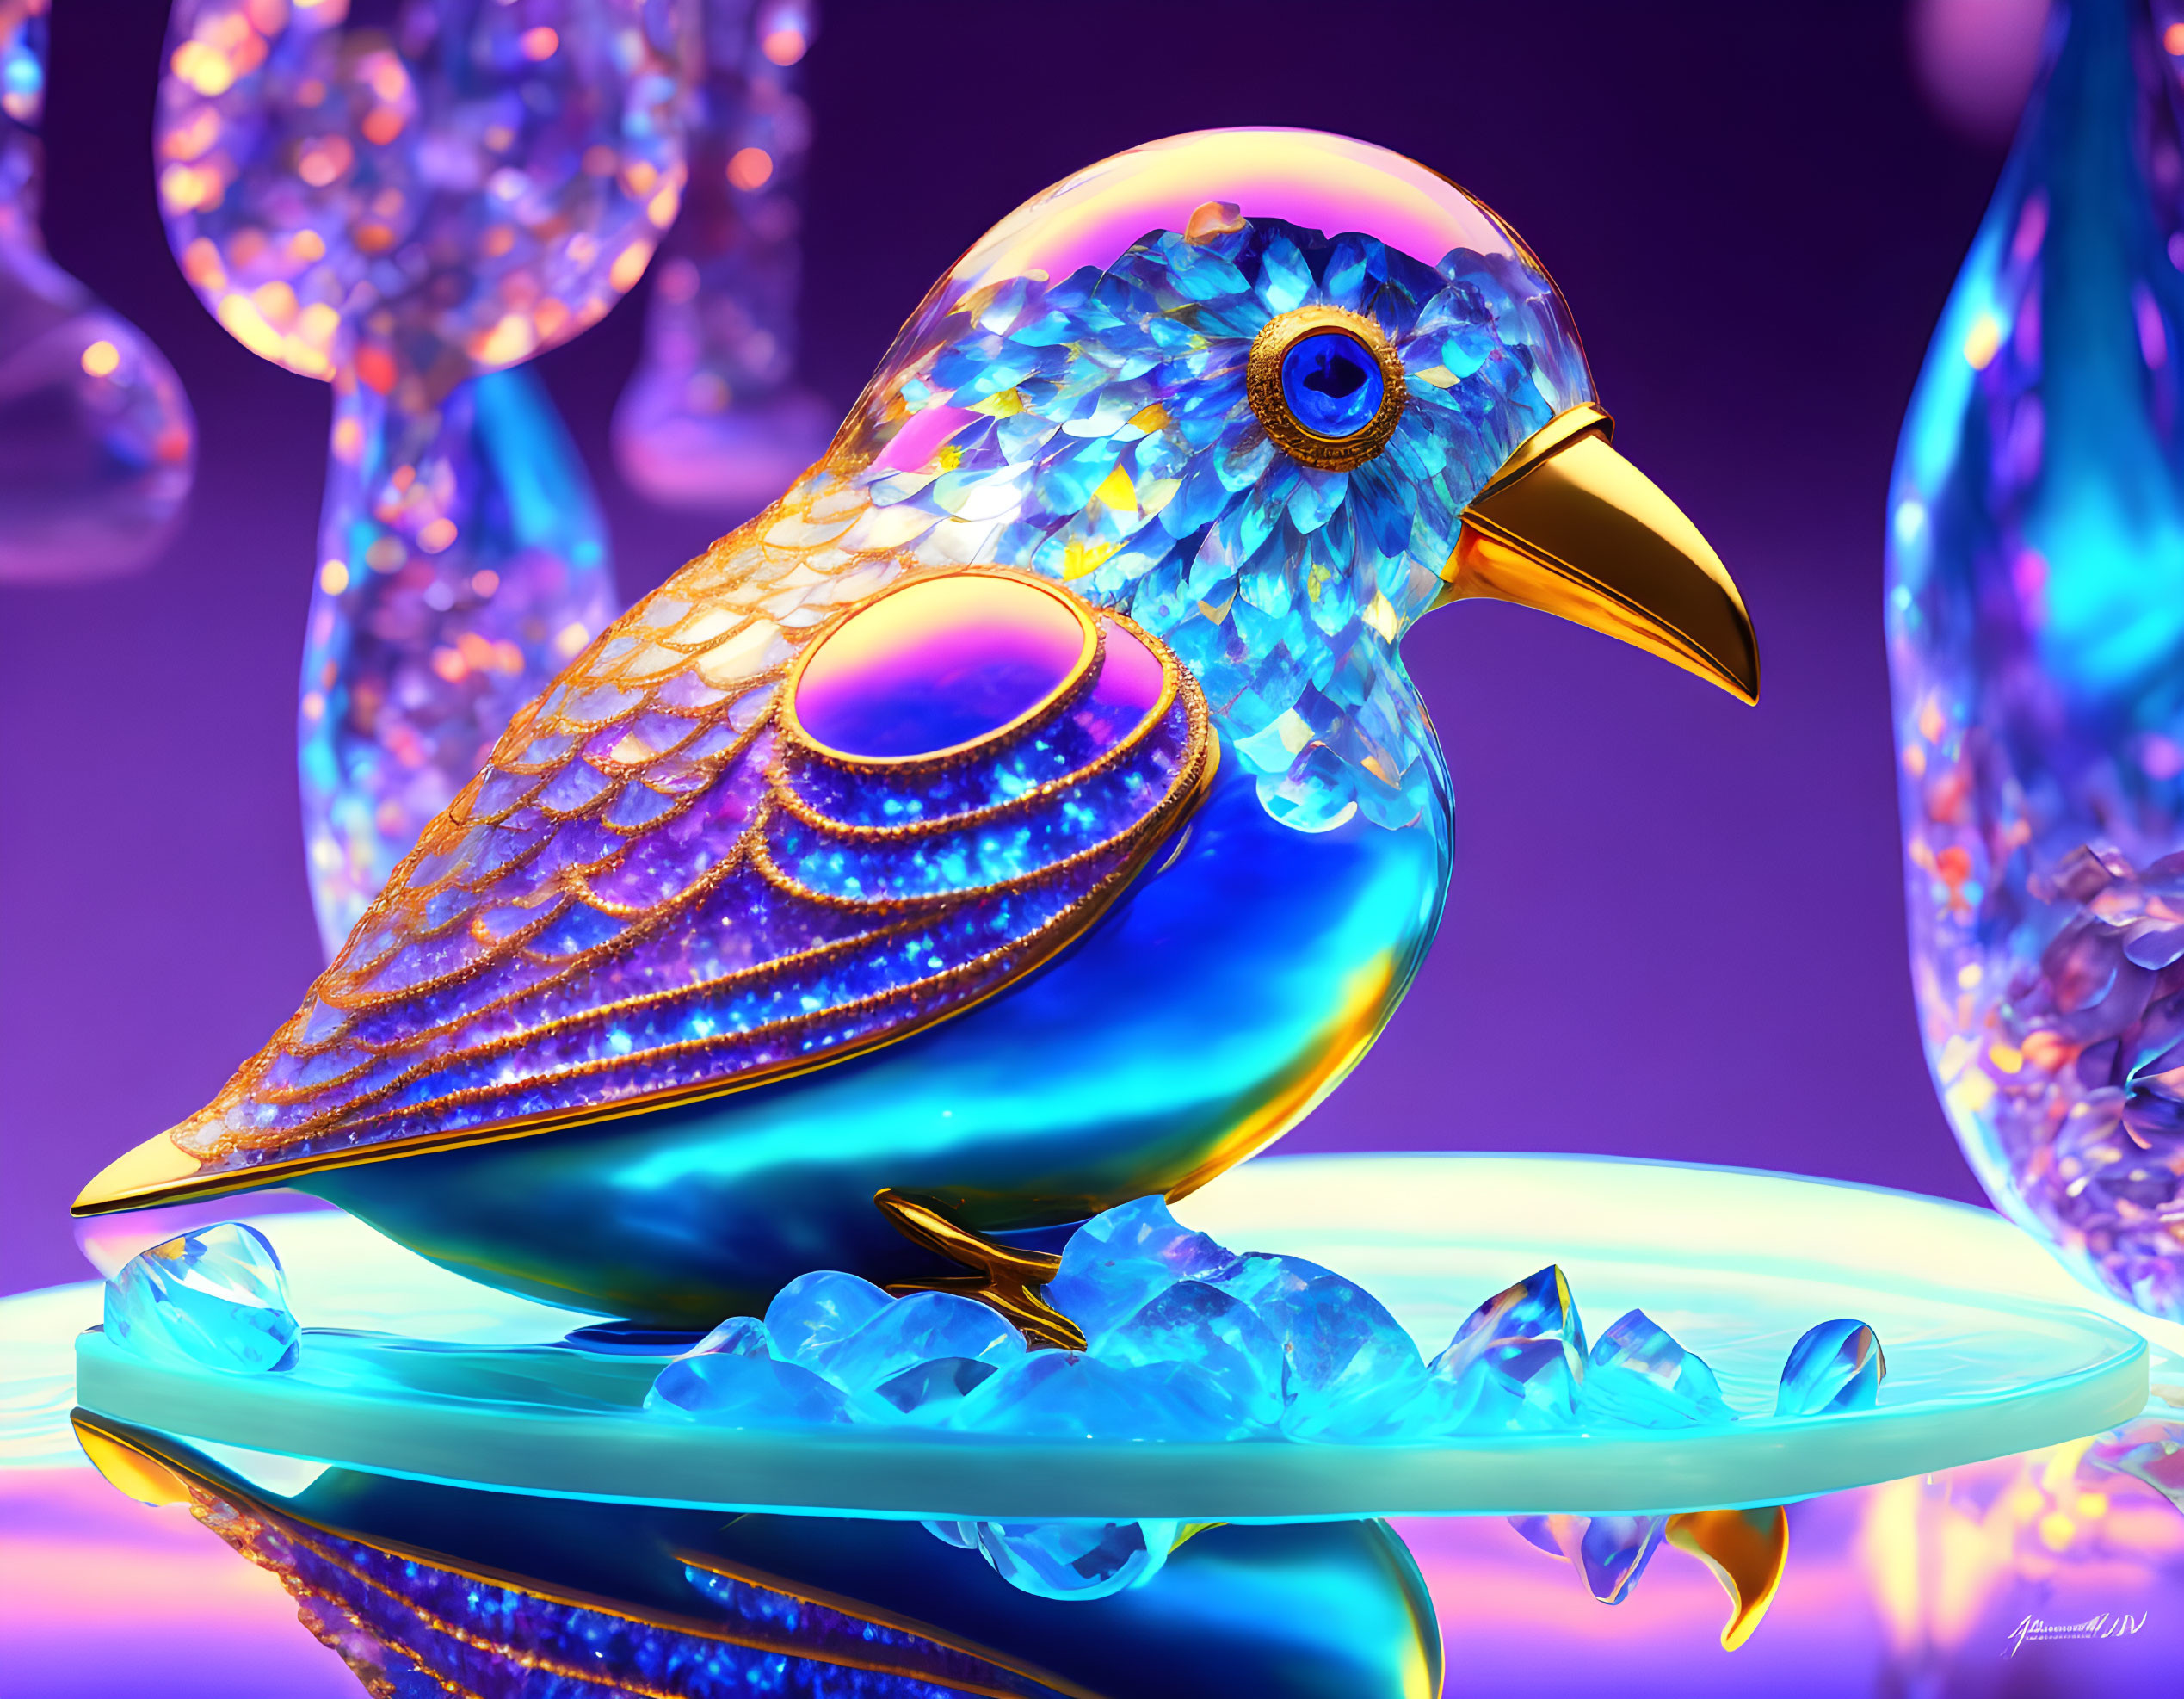 Colorful Crystal Bird Artwork on Purple Background with Glowing Orbs